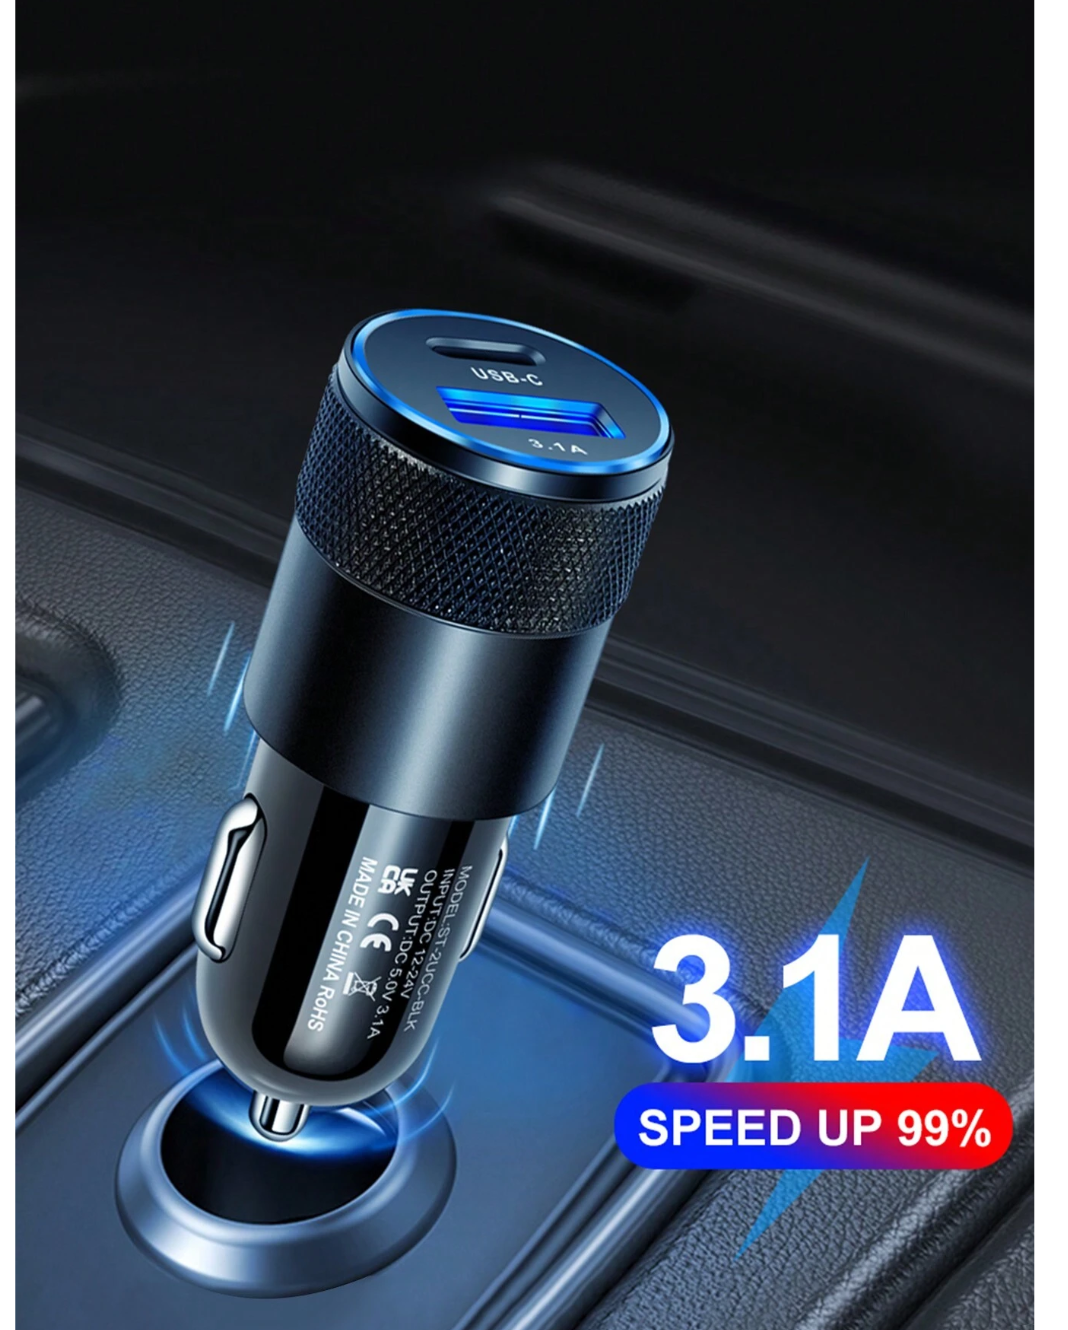 Sleek Speedster: 1pc Black 3.1A USB+PD Metal Car Charger – Aluminum Alloy, 15W PD USB Lighter Adapter, 3.0 Fast Charging for iPhone 13/12/11 Pro Max, Xiaomi, Samsung – Power and Style on the Go!